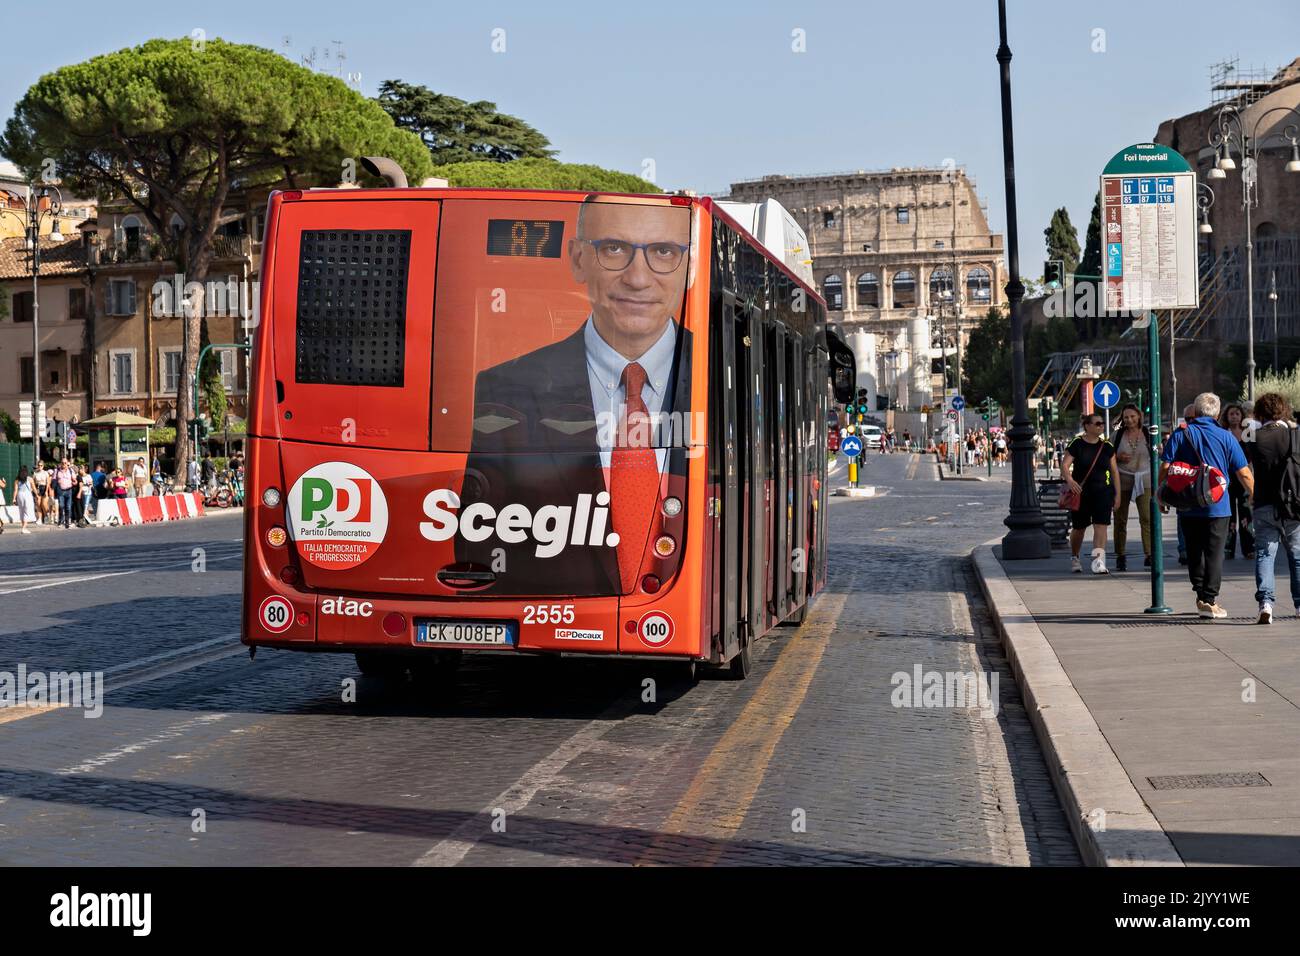 Italian general elections on September 25, 2022. Enrico Letta, leader of the Italian Democratic Party PD poster on a public transport bus. Rome, Italy Stock Photo